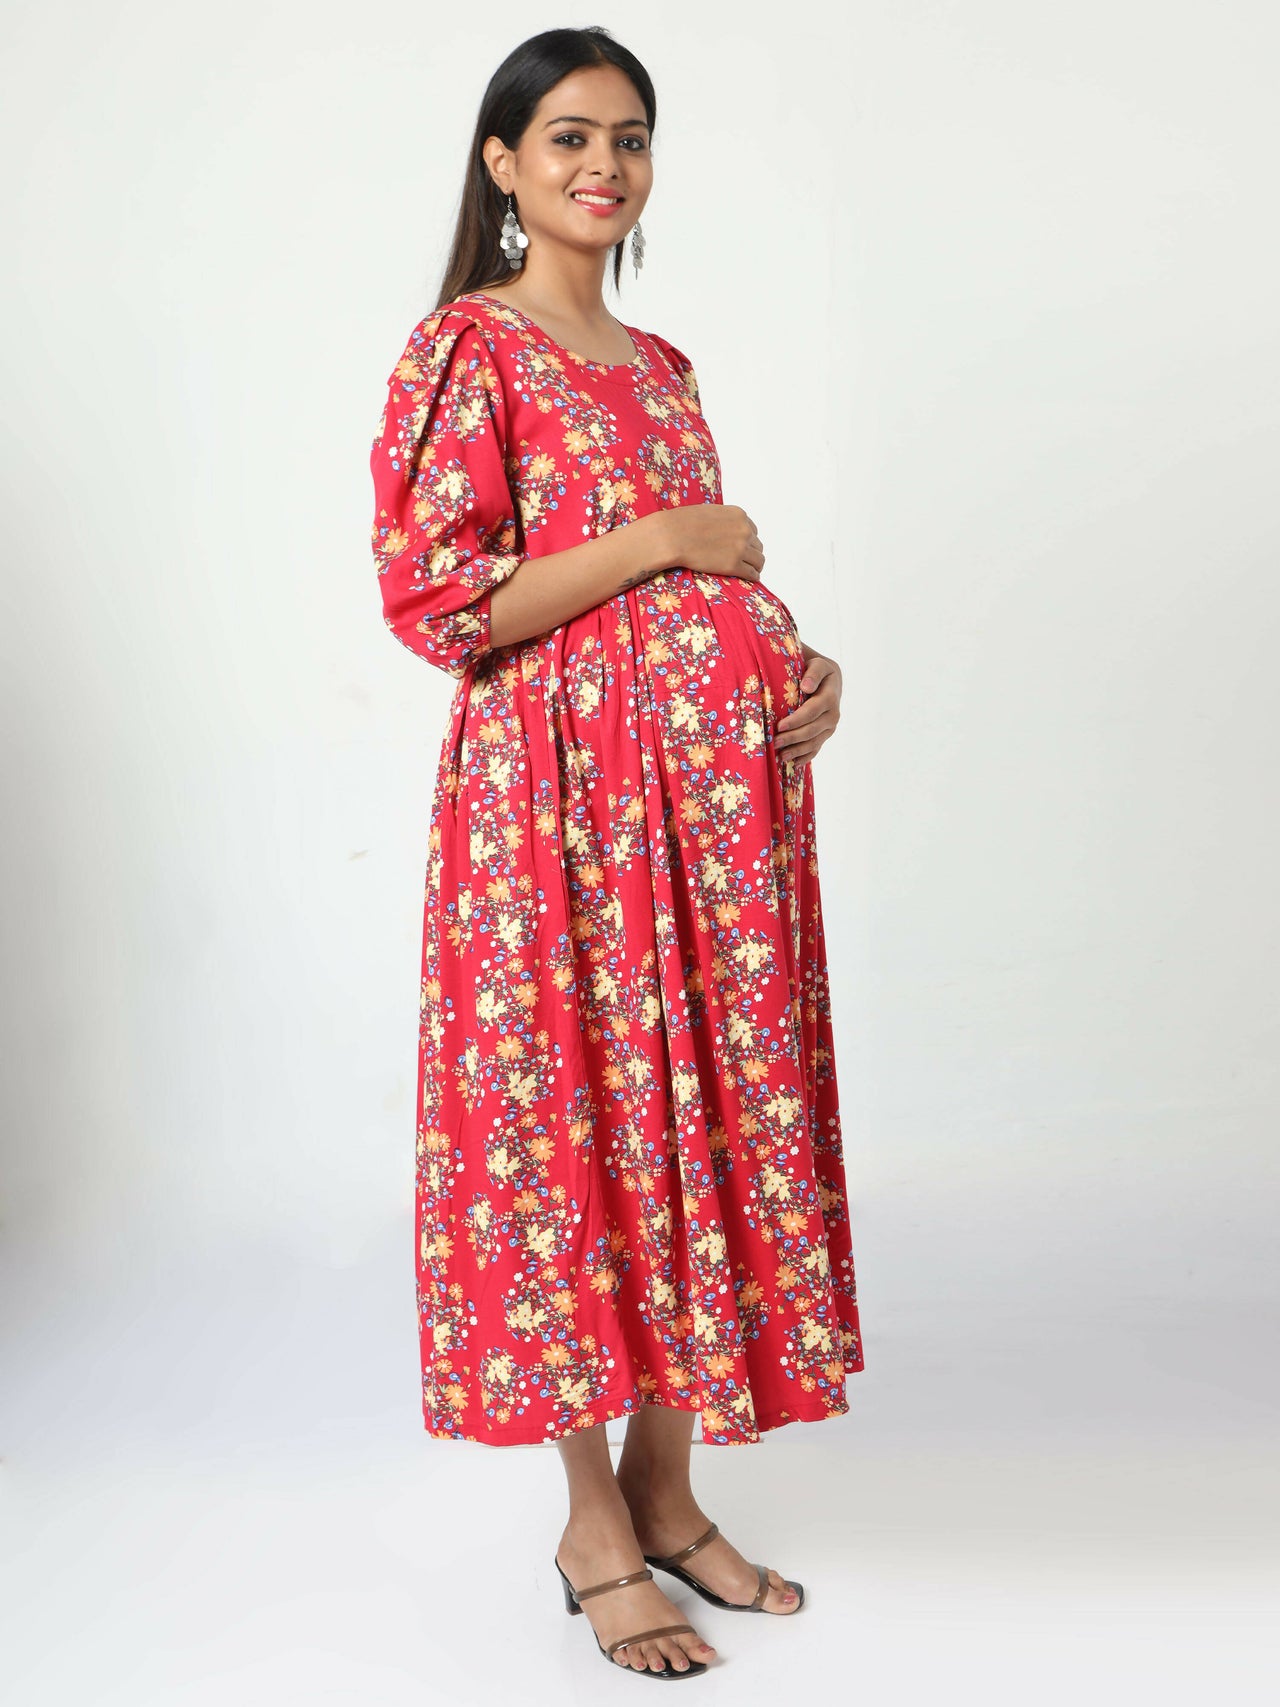 Manet Three Fourth Maternity Dress Floral Print With Concealed Zipper Nursing Access - Red - Distacart